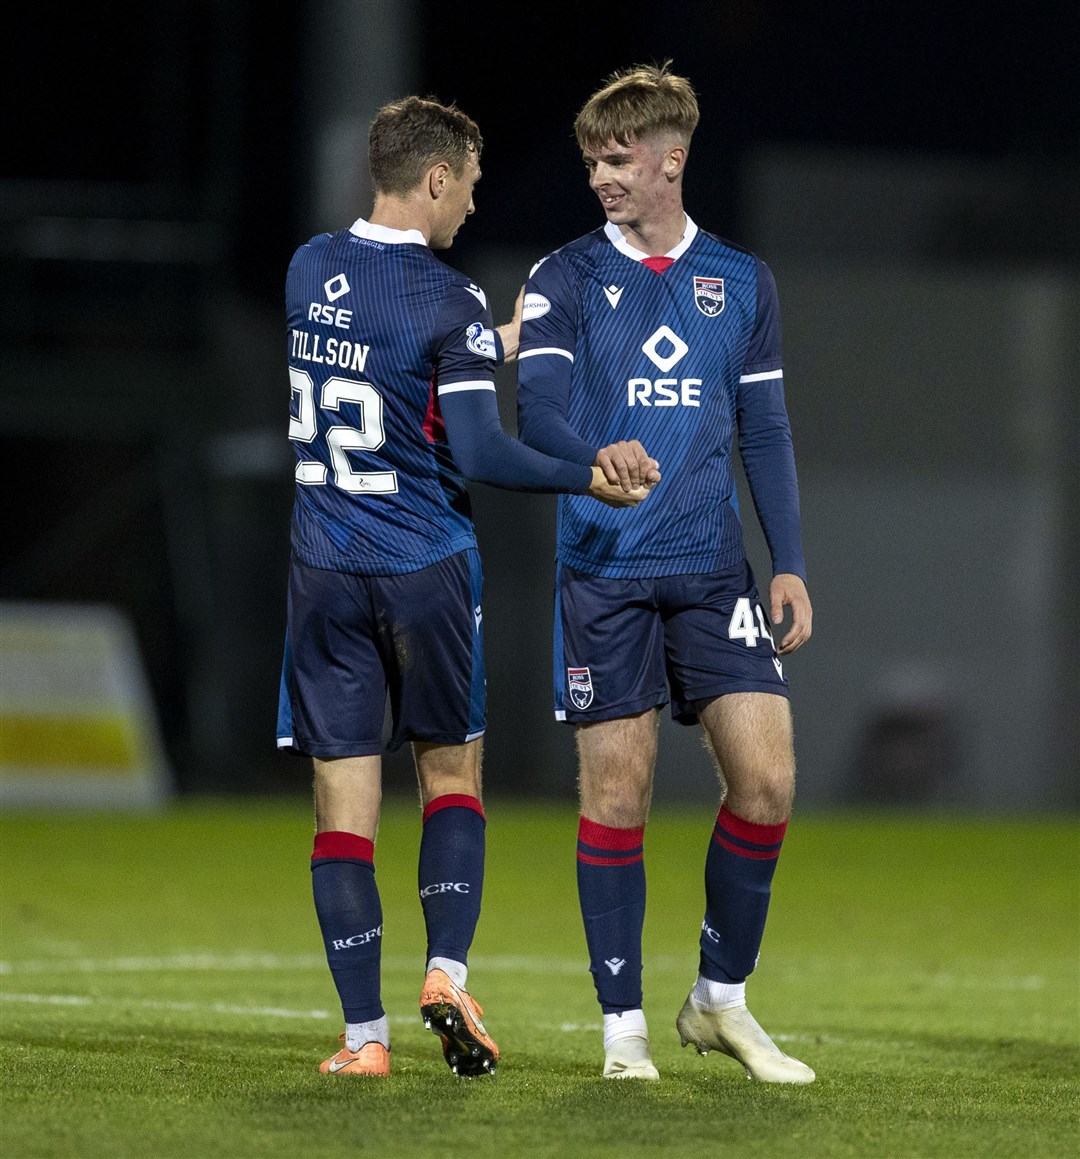 Matthew Wright came off the bench to score a dramatic equaliser for Ross County in stoppage time. Picture: Ken Macpherson